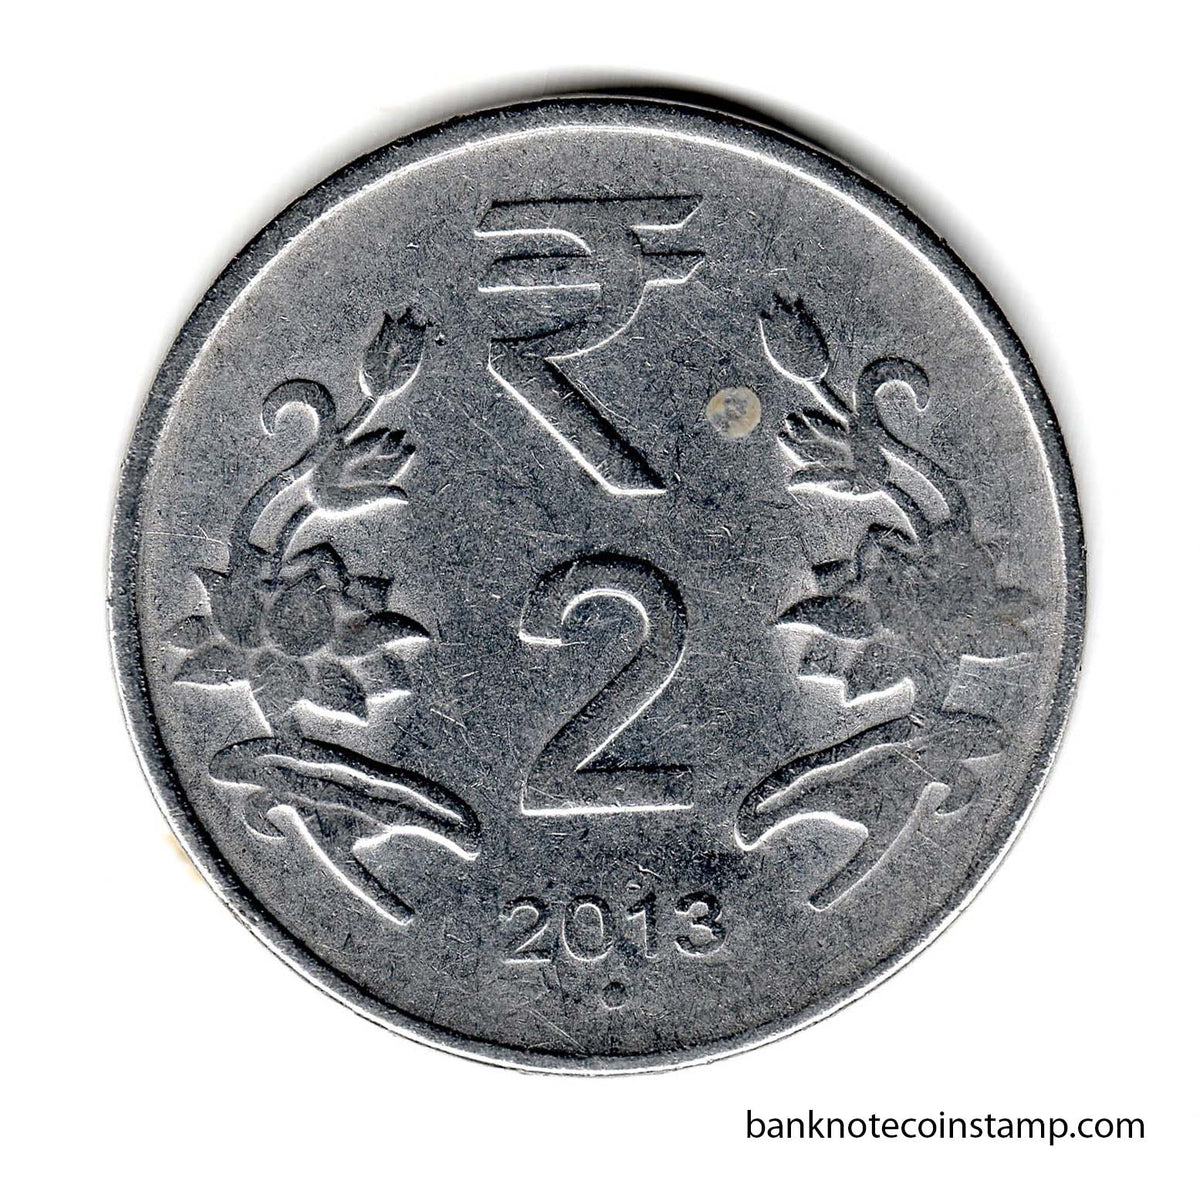 India 2 Rupees 2013 Used Coin (Noida Mint 🟢) – Banknotecoinstamp